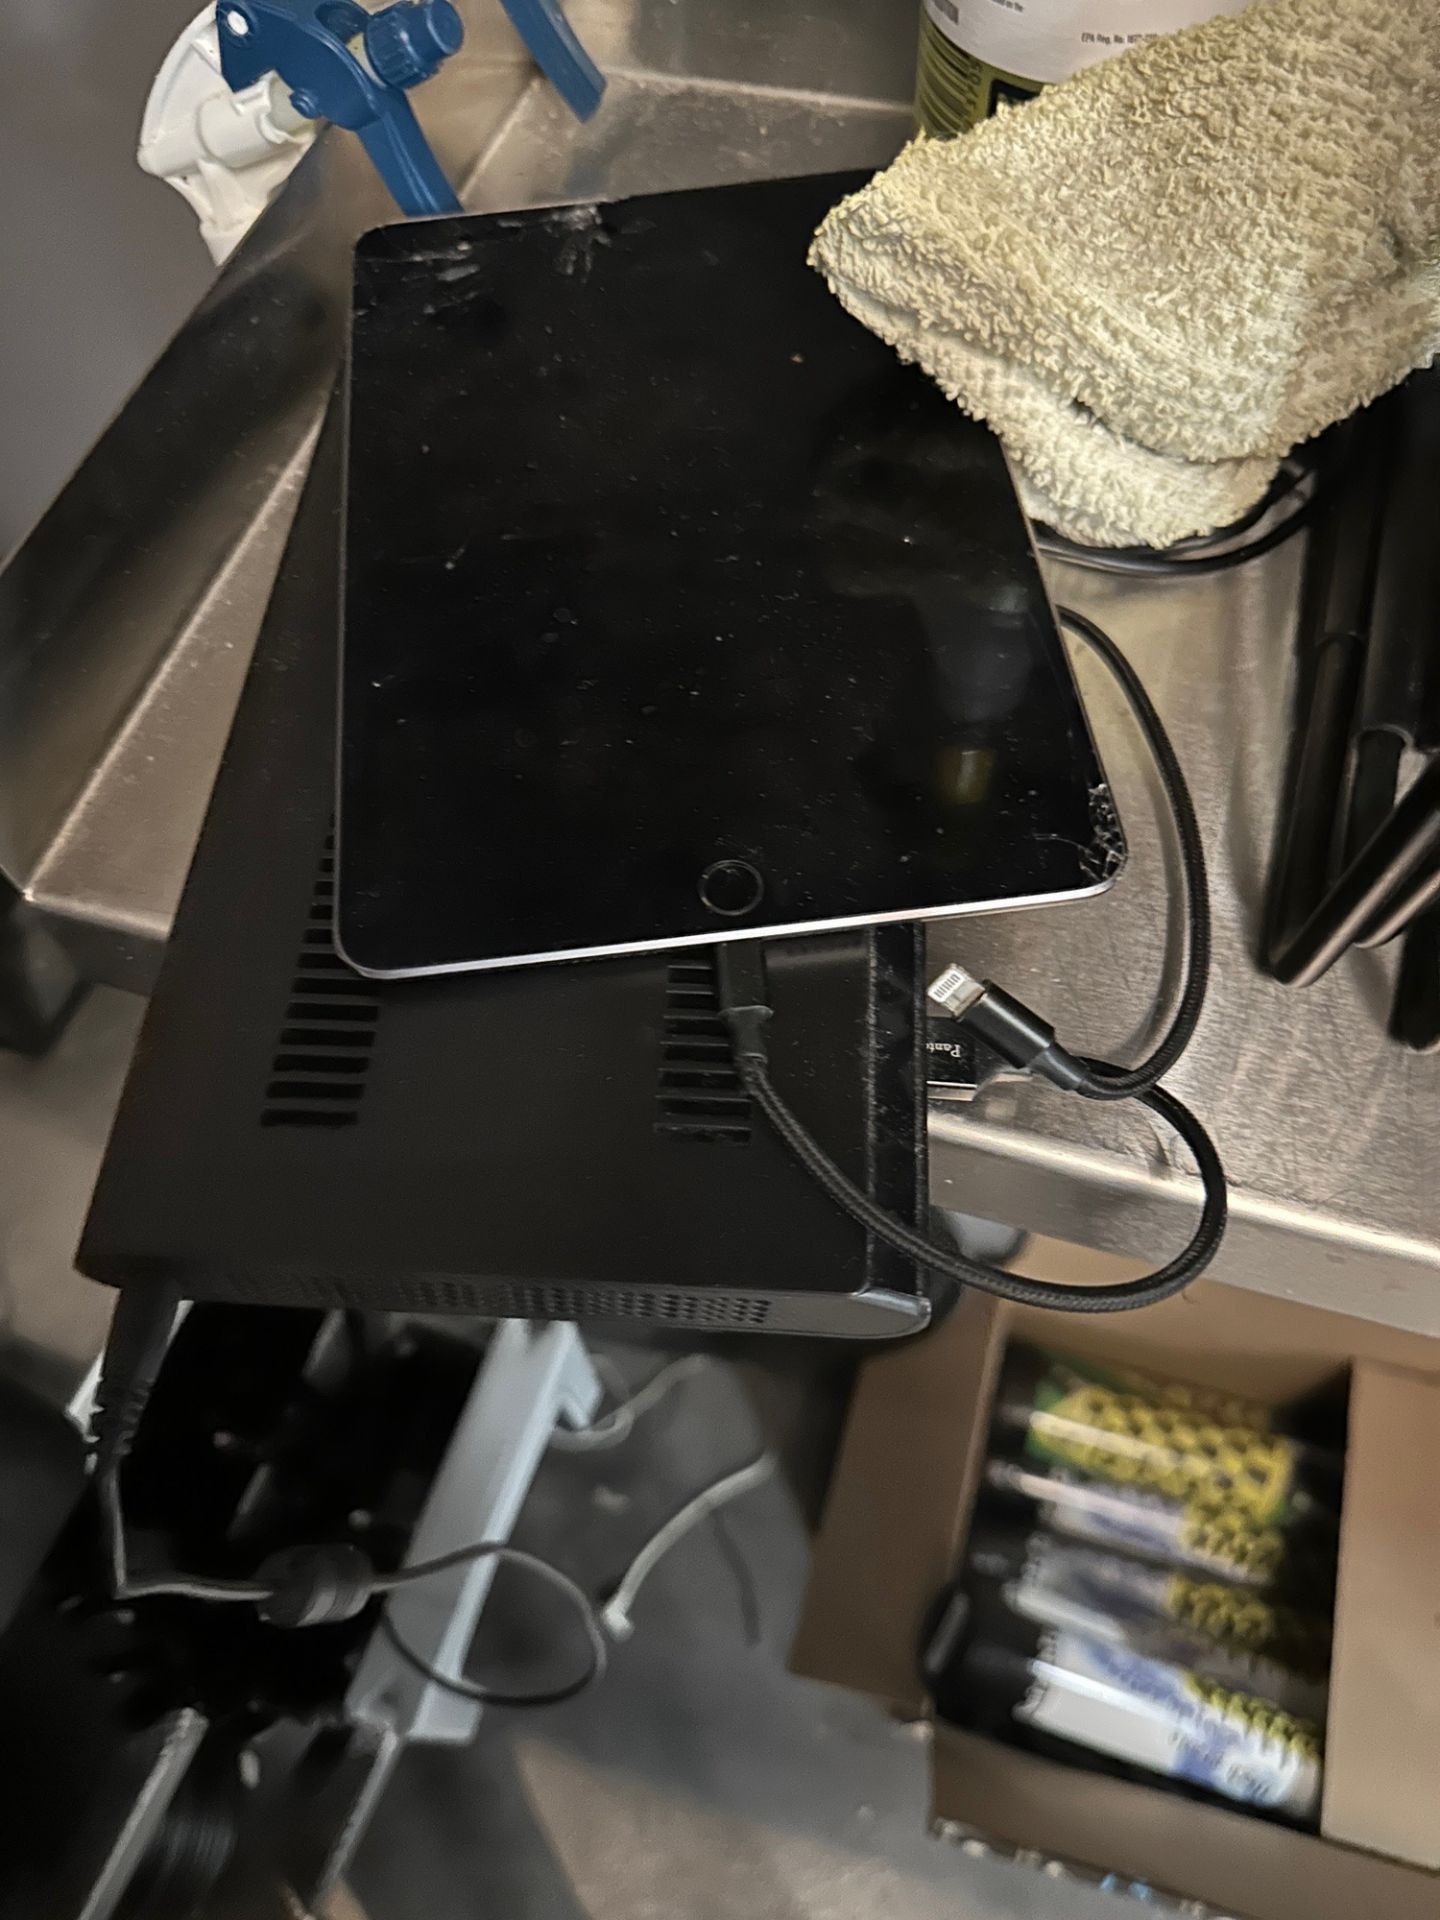 Toast POS System with Handhelds, Drawers, Printers, Order Screens - Image 9 of 9